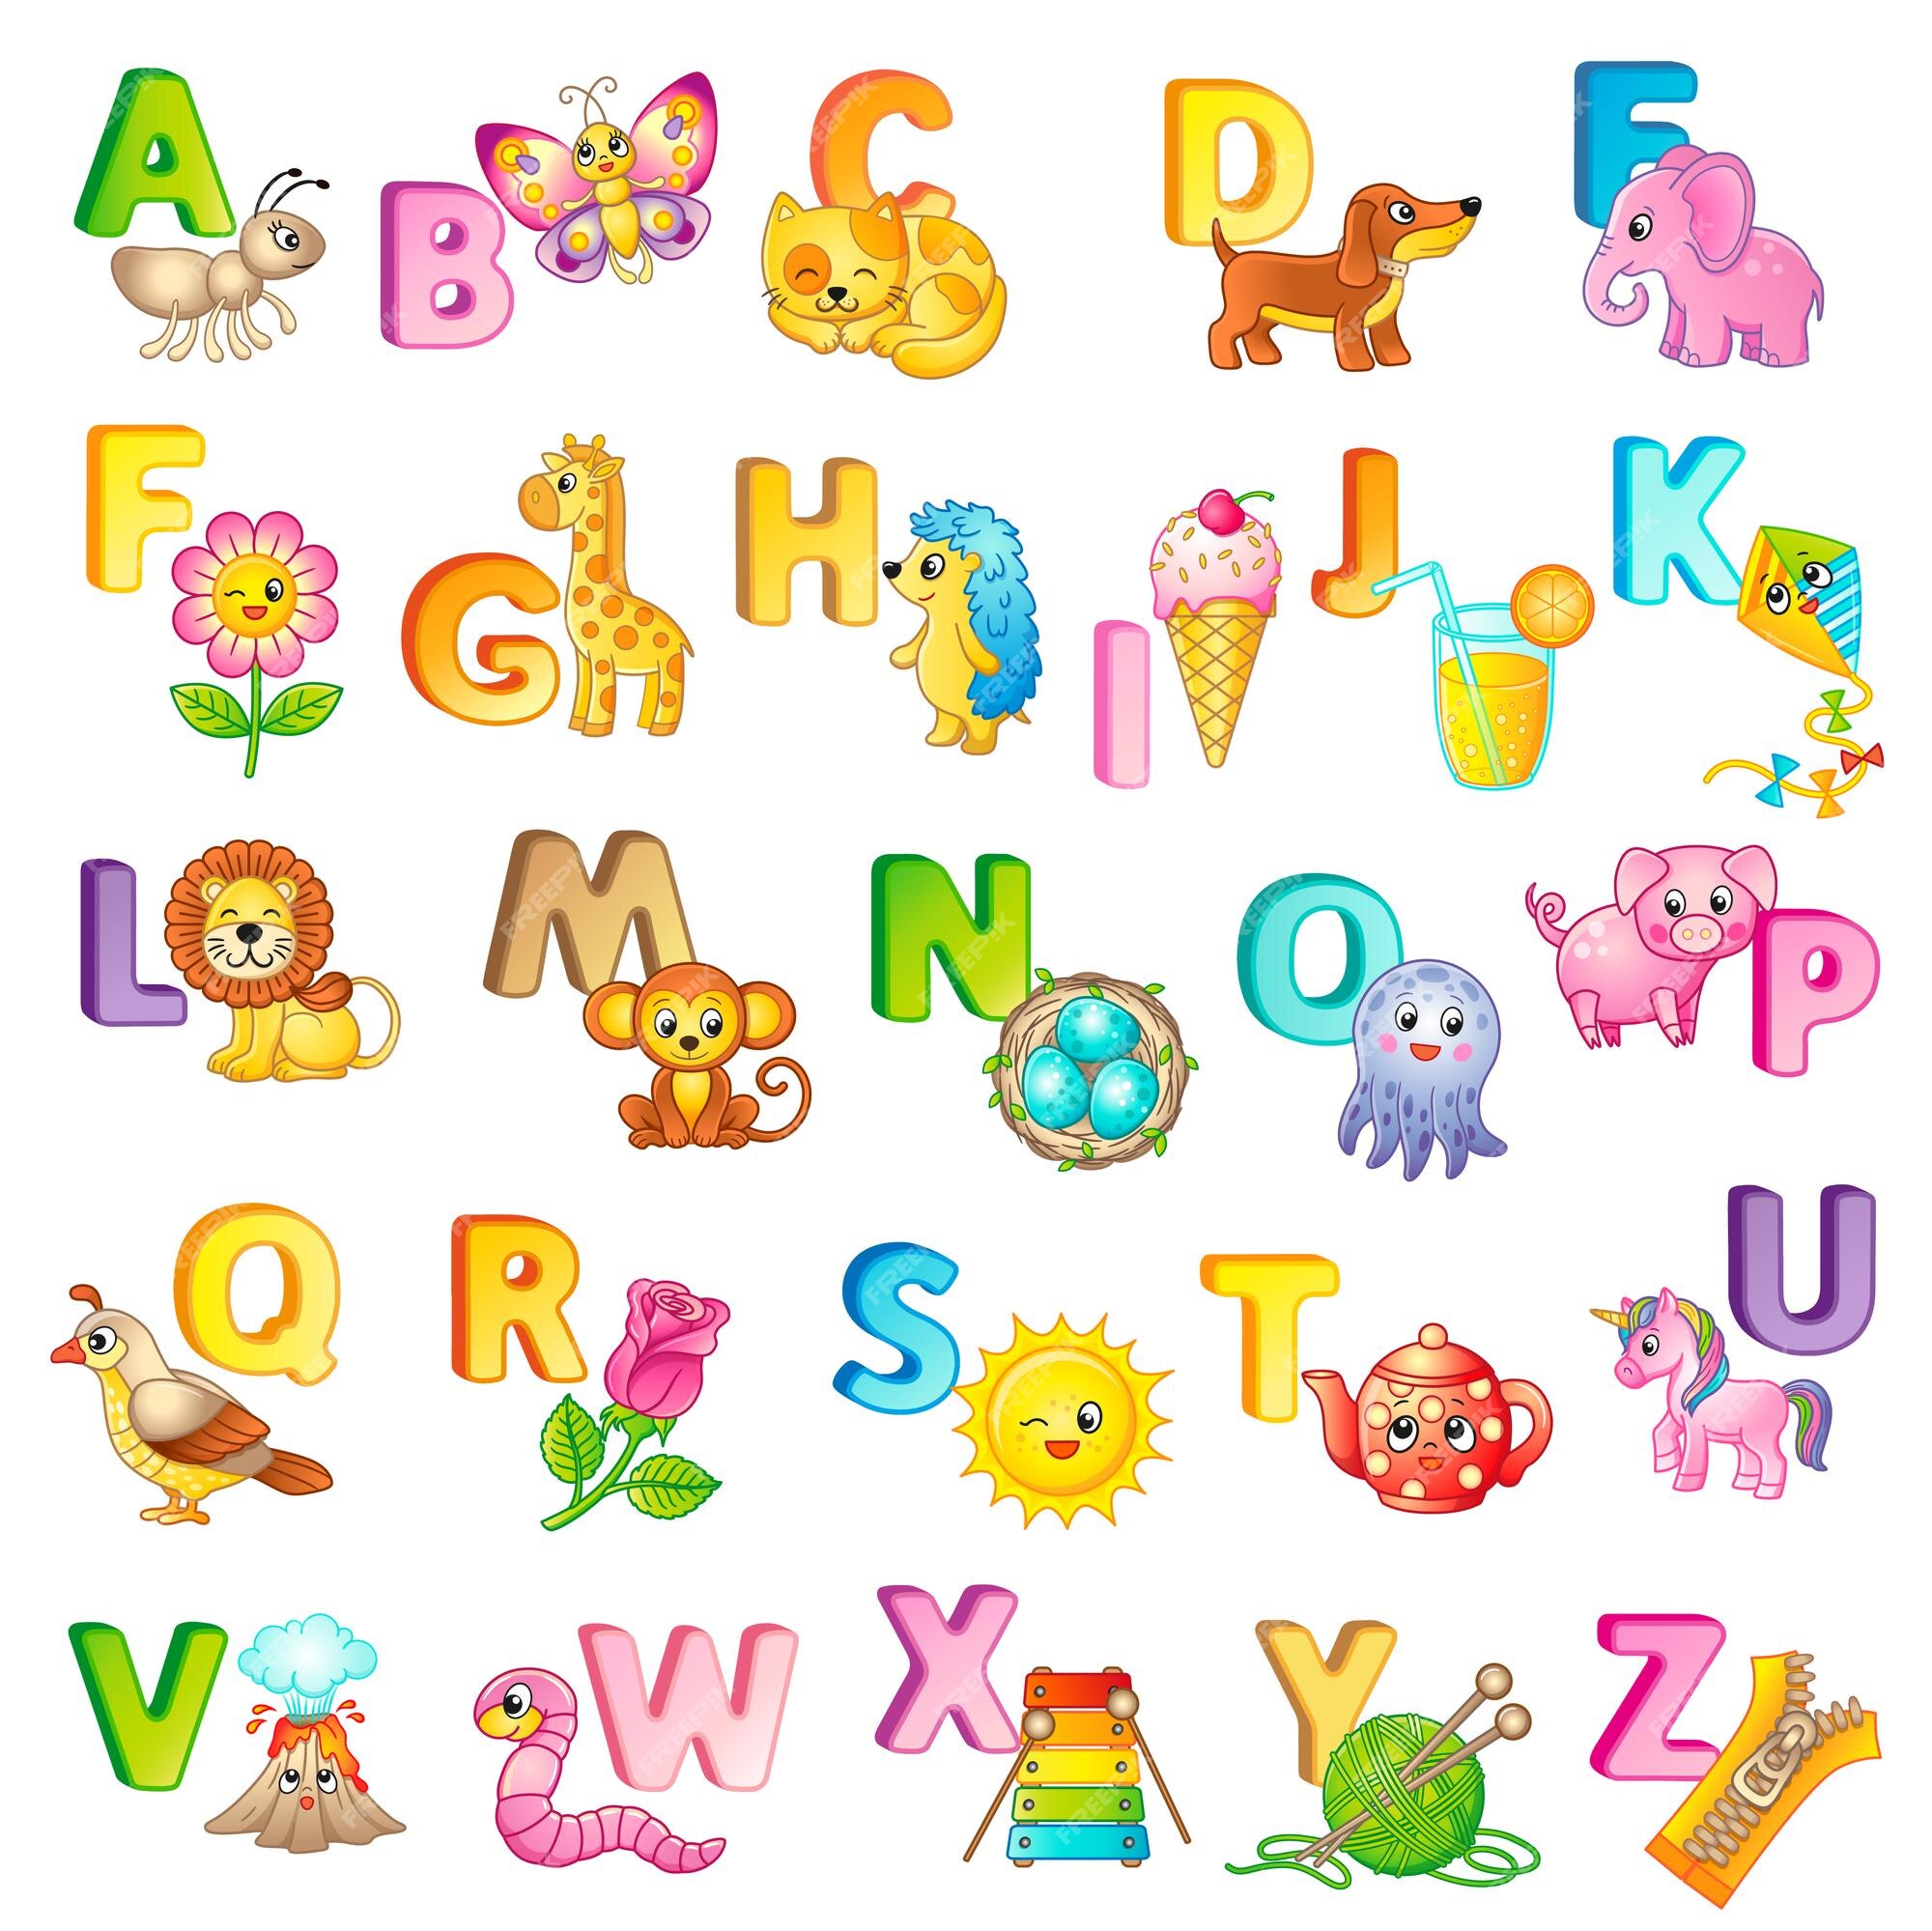 Premium Vector | Abc poster with capital letters of the english and cute  cartoon animals and things. poster for kindergarten and preschool. cards  for learning english. letter c. cat